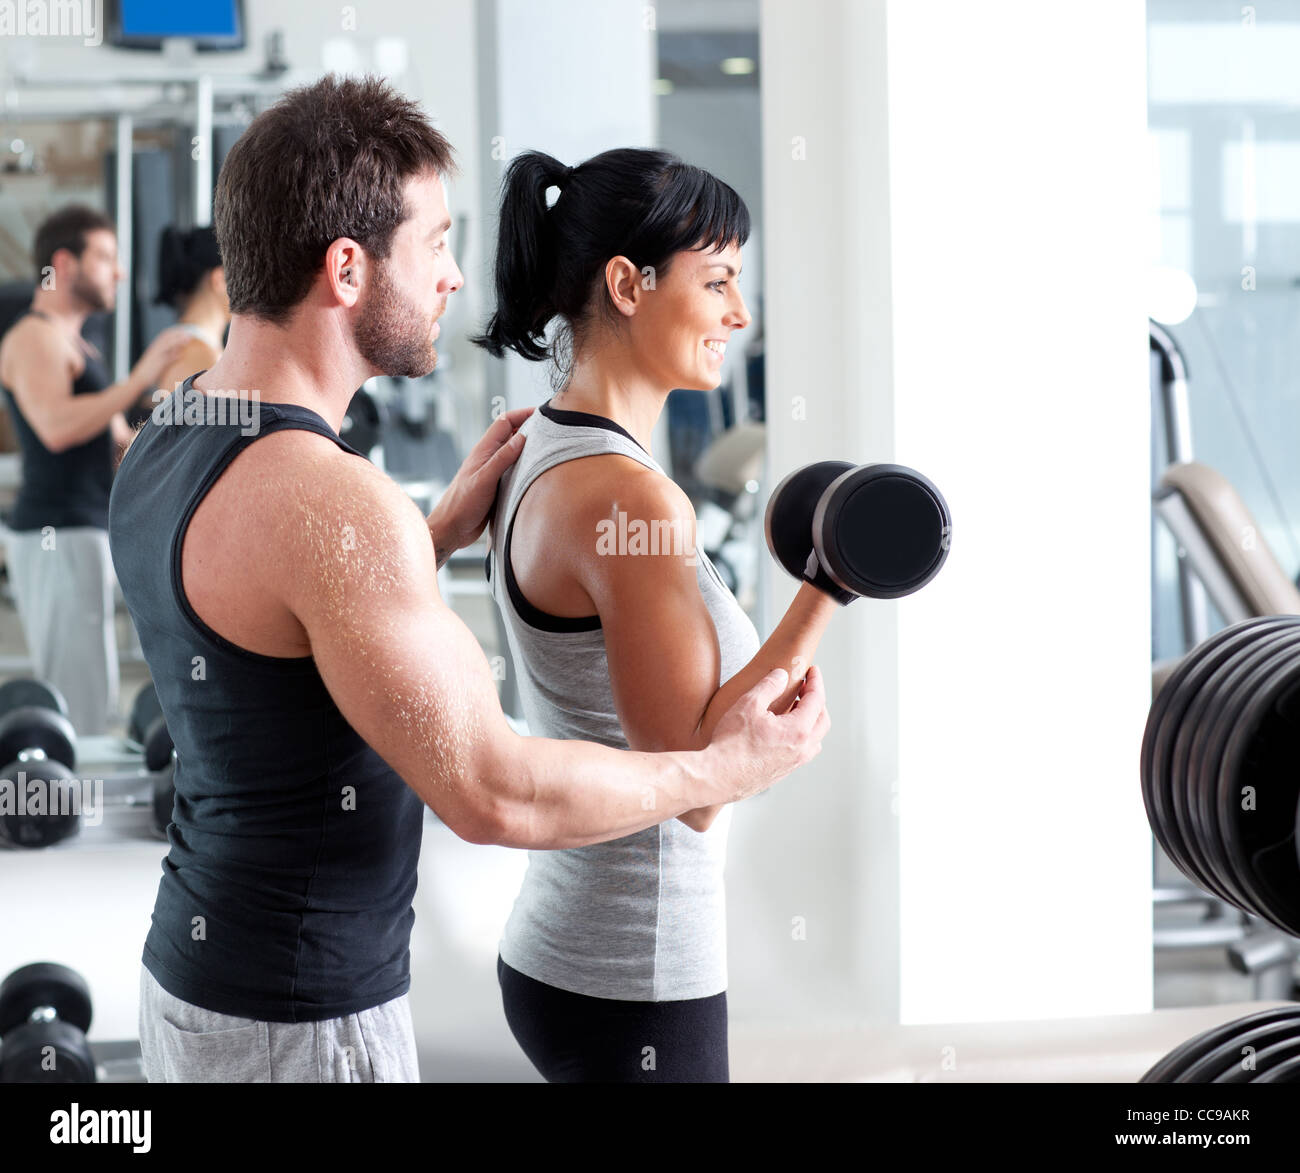 gym woman personal trainer man with weight training equipment Stock Photo